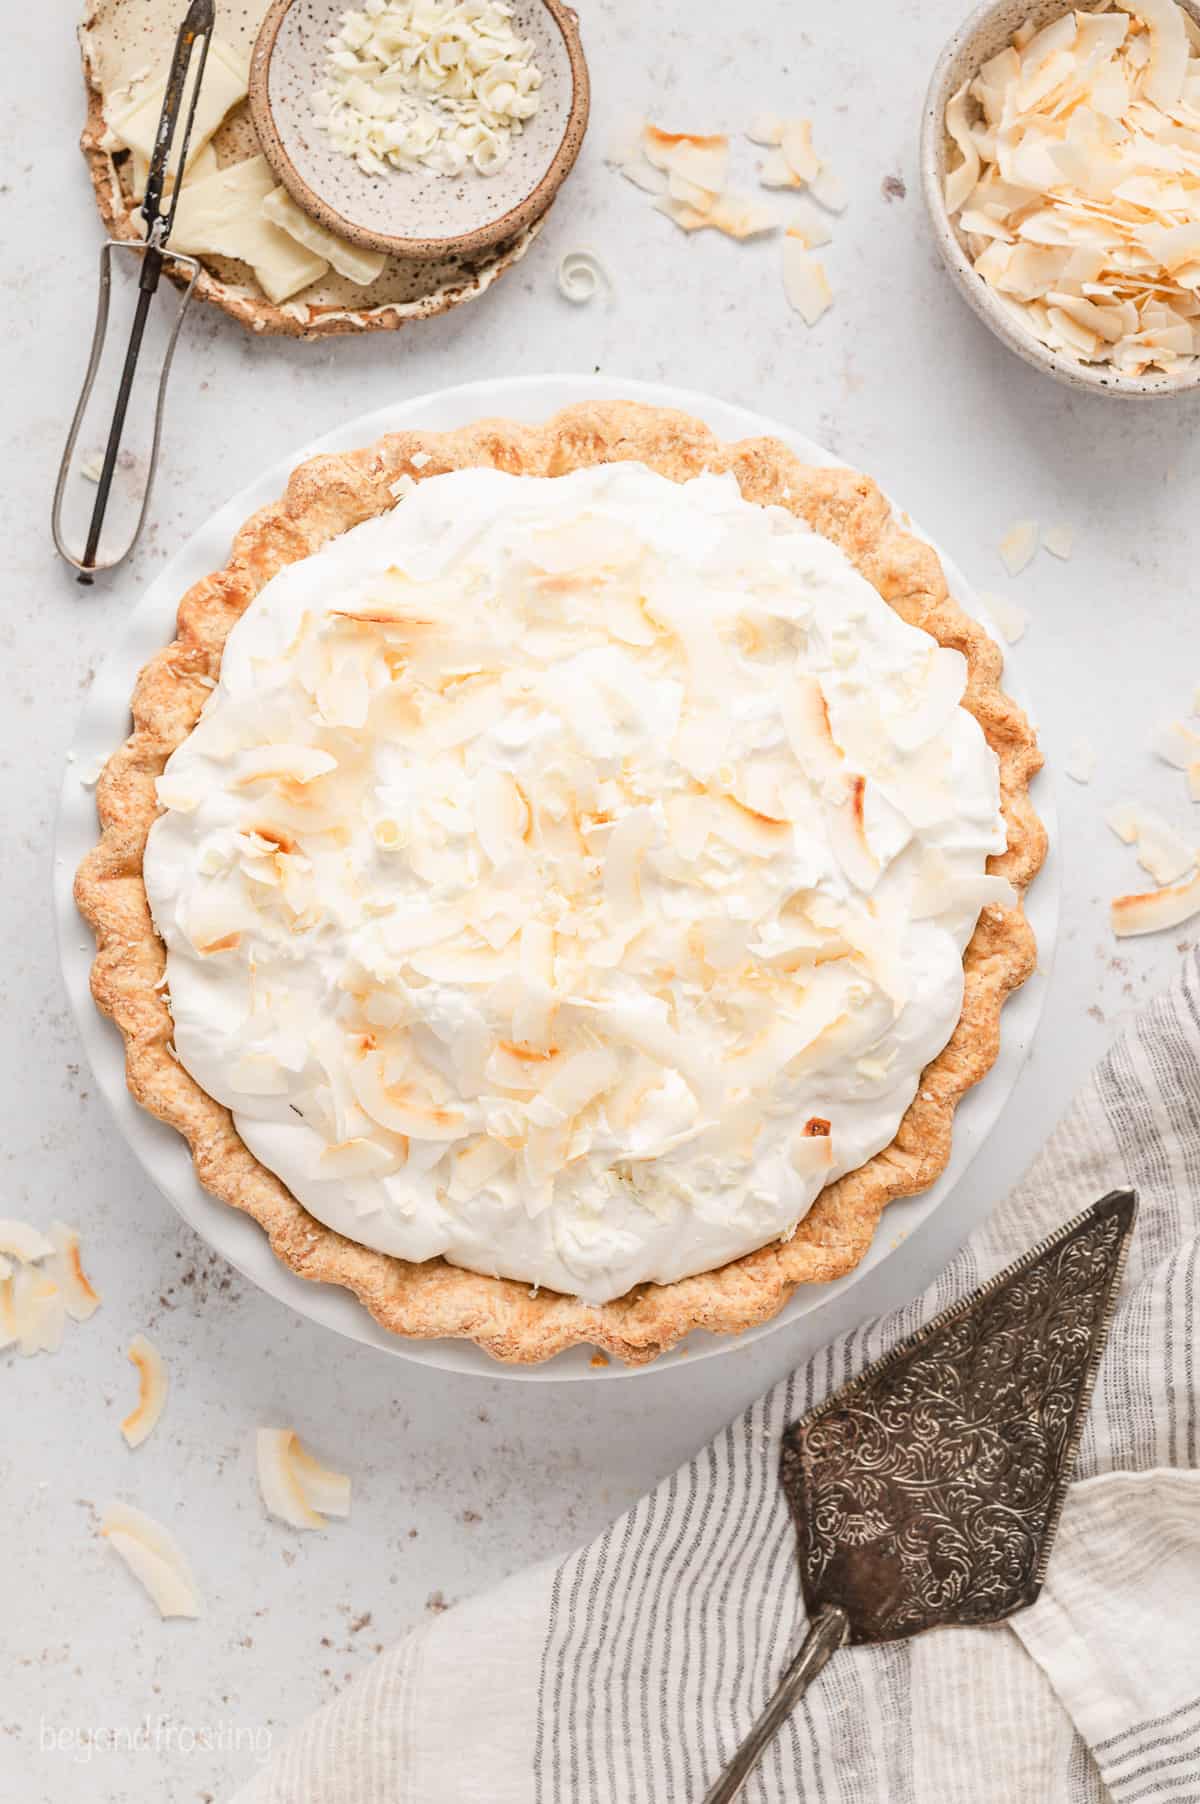 Overhead view of a whole coconut cream pie in a pie plate, next to a cake server and a bowl of coconut flakes on a countertop.